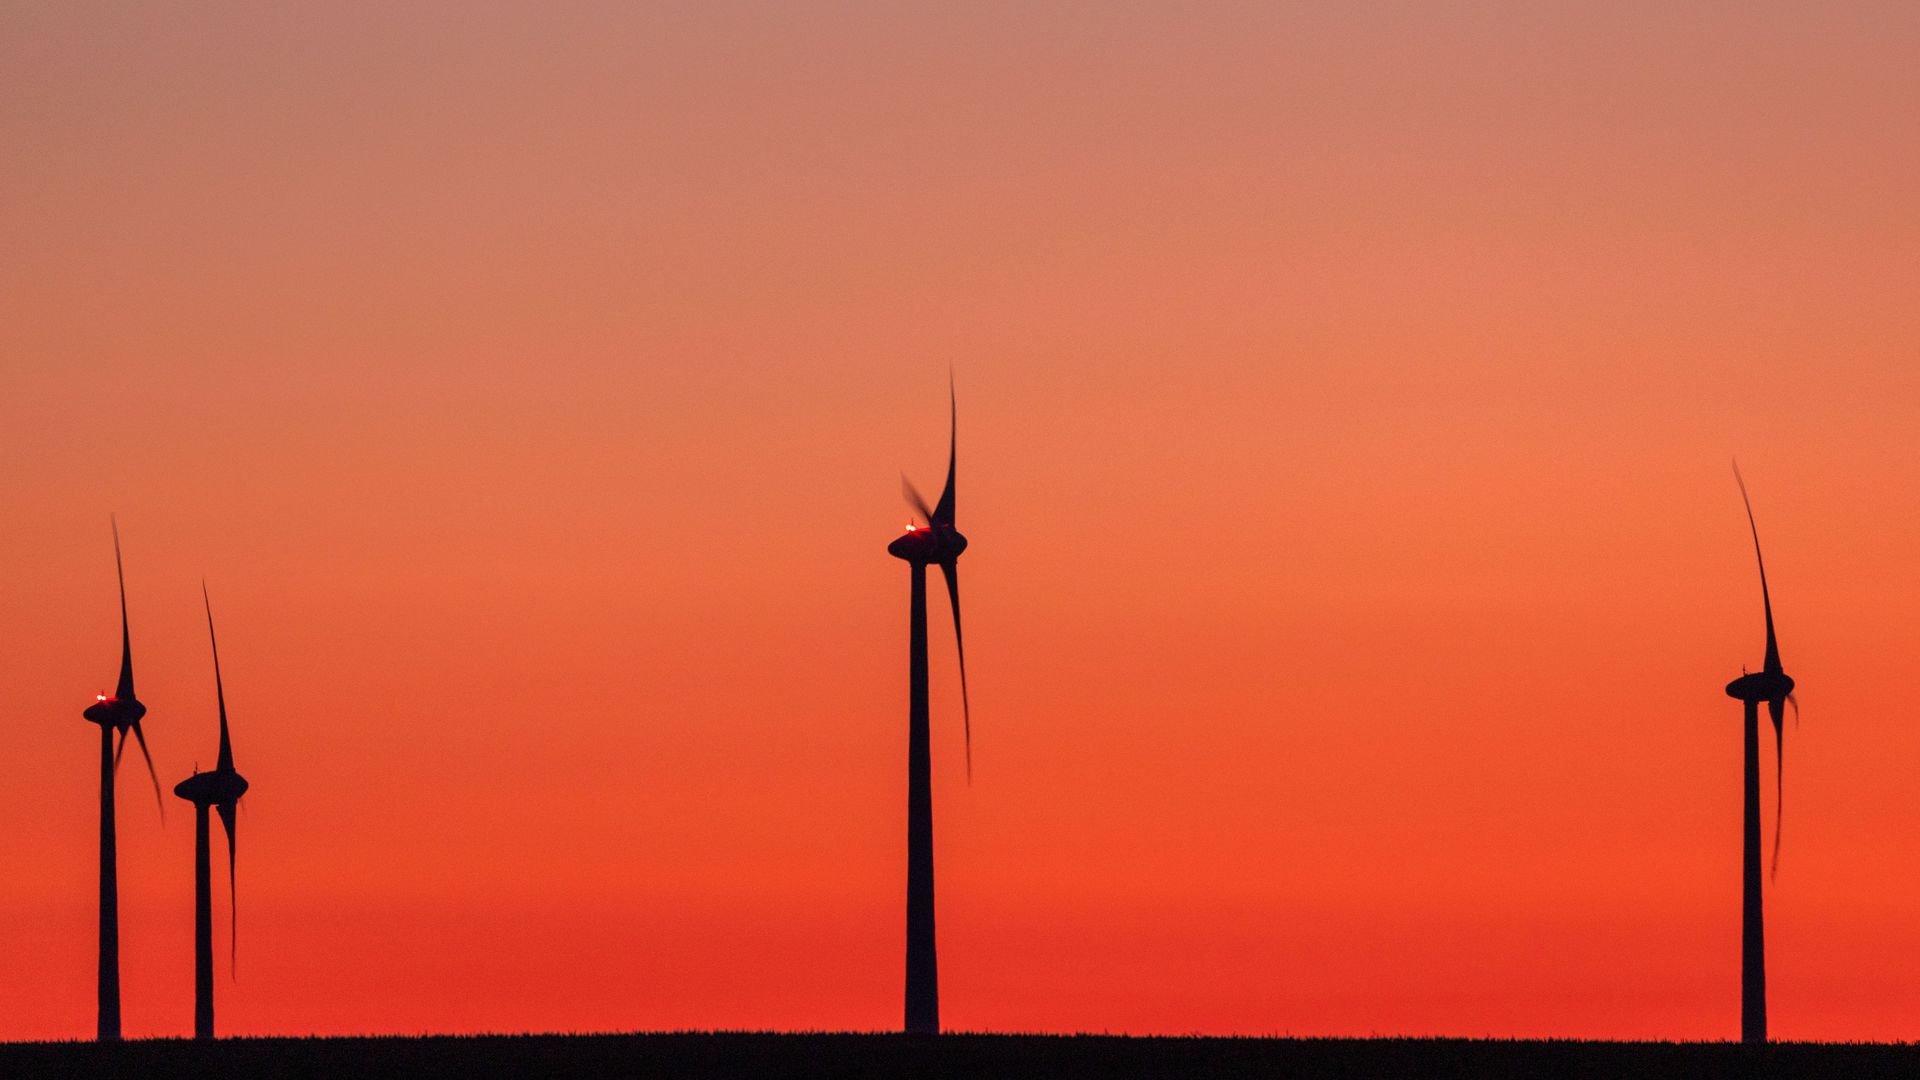 The sun sets behind a series of wind turbines.